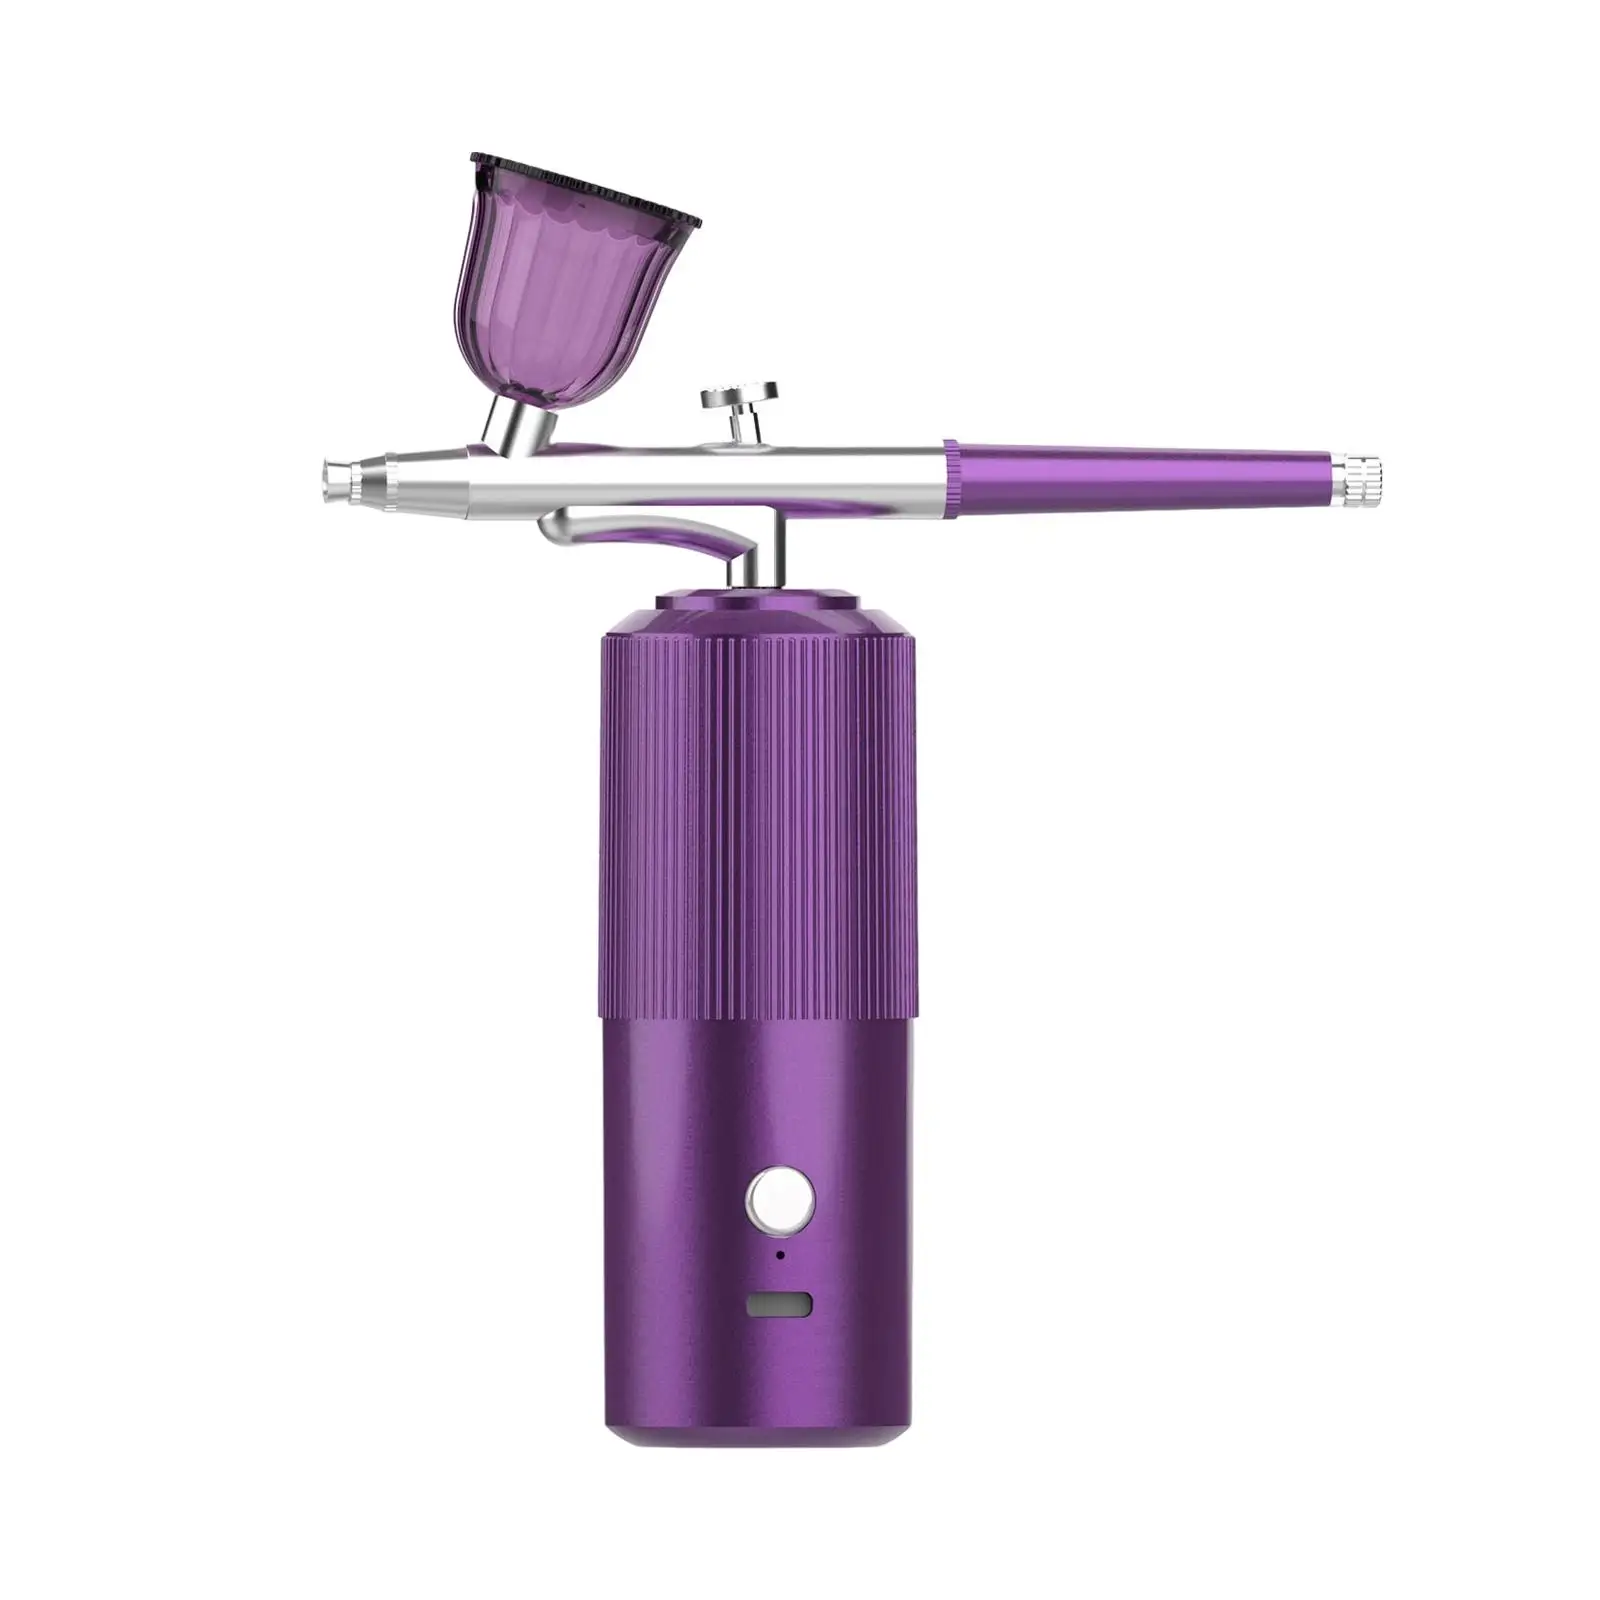 Airbrush Kit Portable accessory Professional Handheld for Makeup